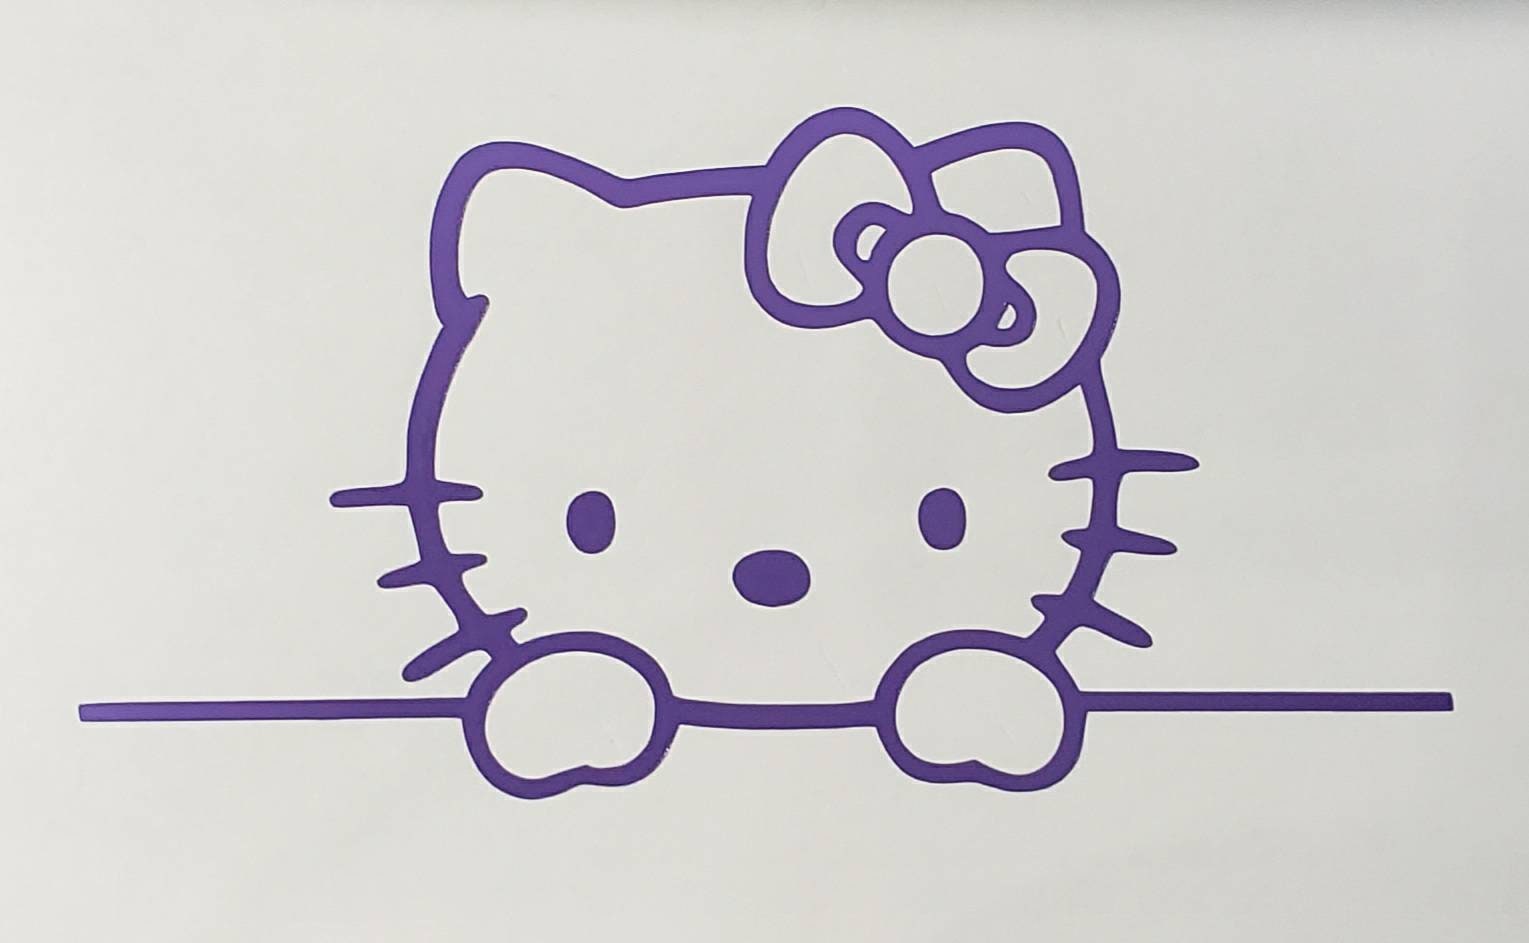 Hello Kitty Wall Stickers Decals WC146 